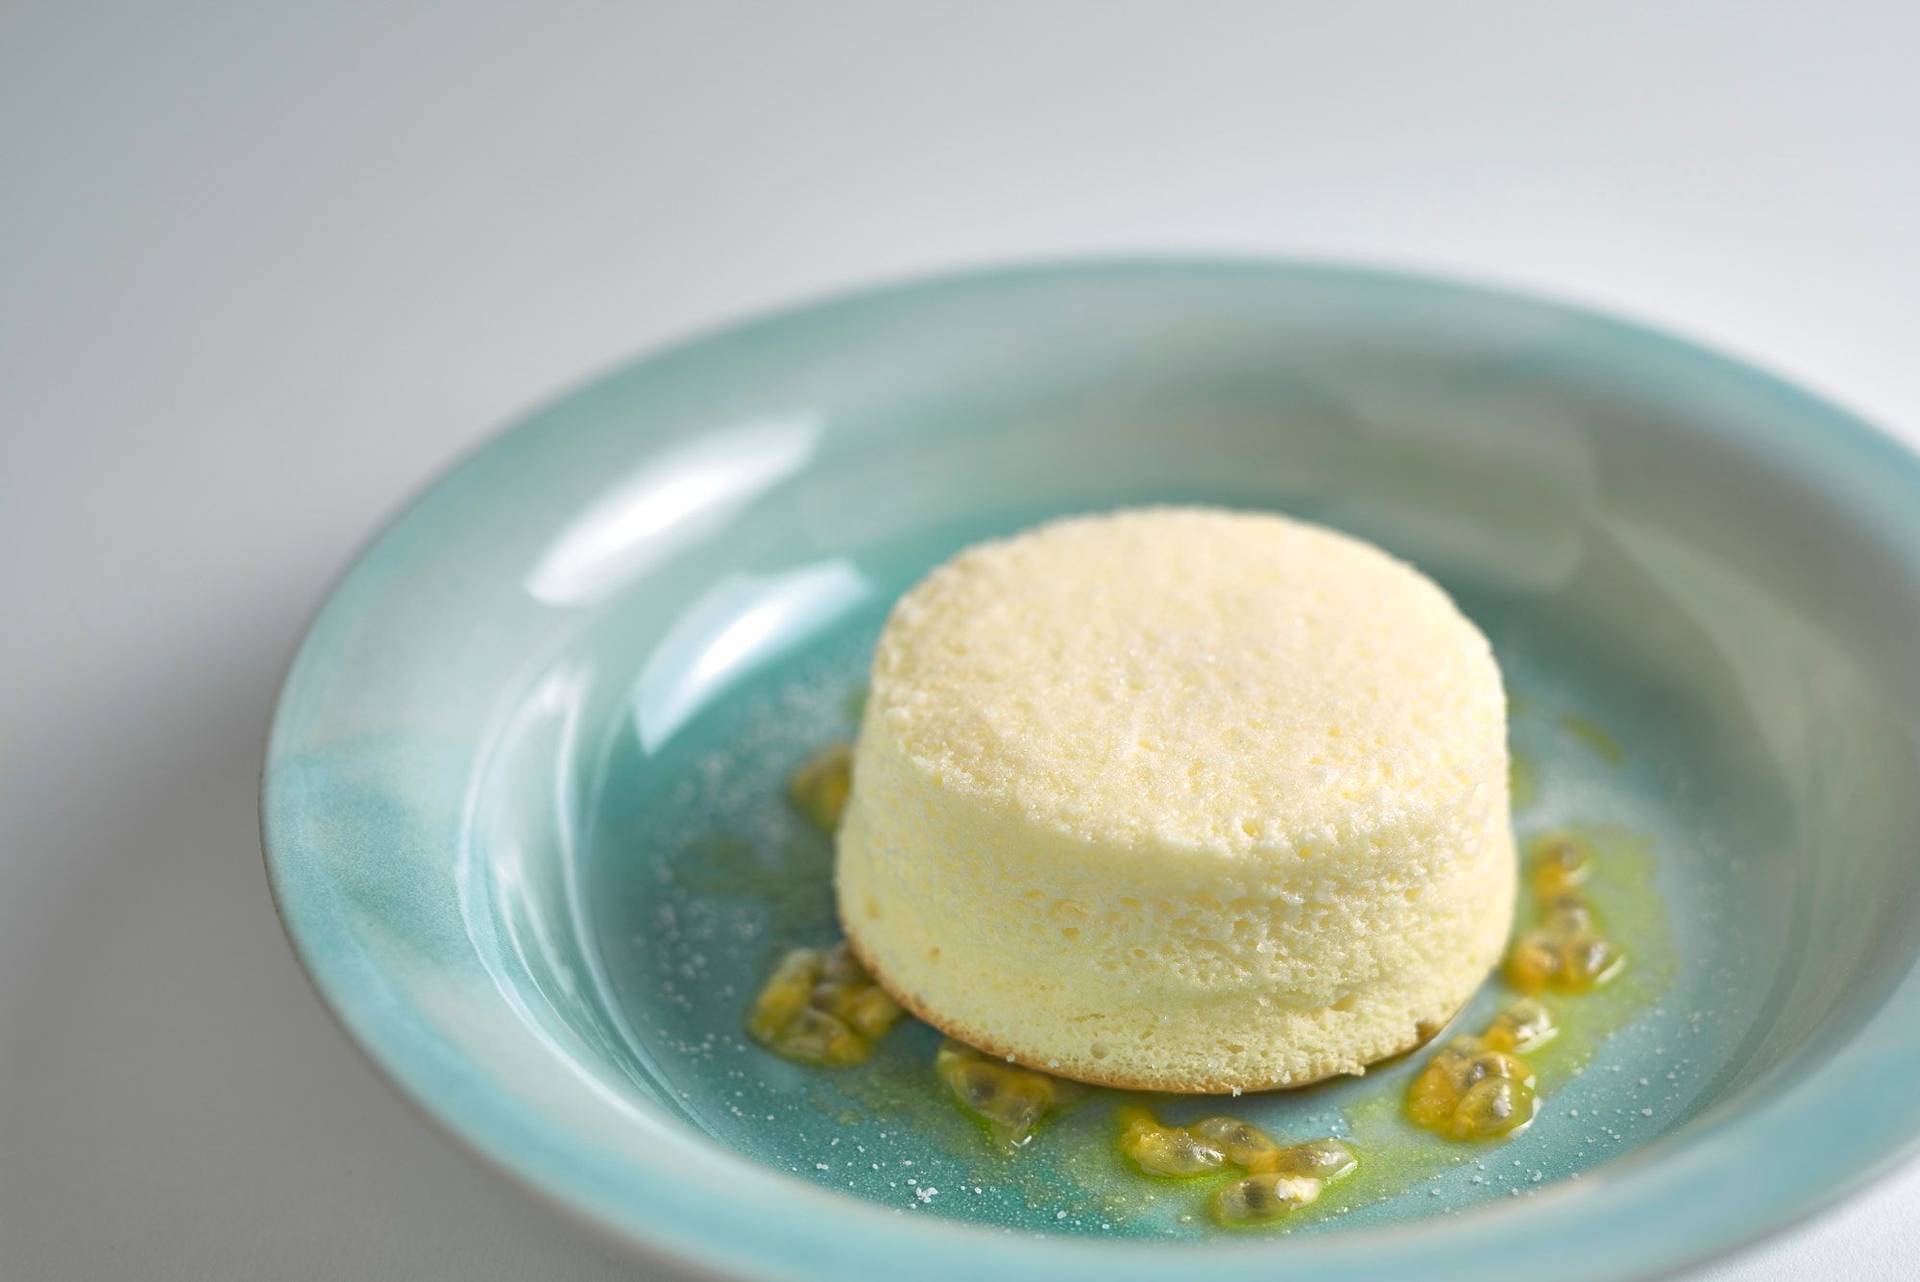 cheesecake souffle with passion fruit and linseed oil in a turquoise plate with white background